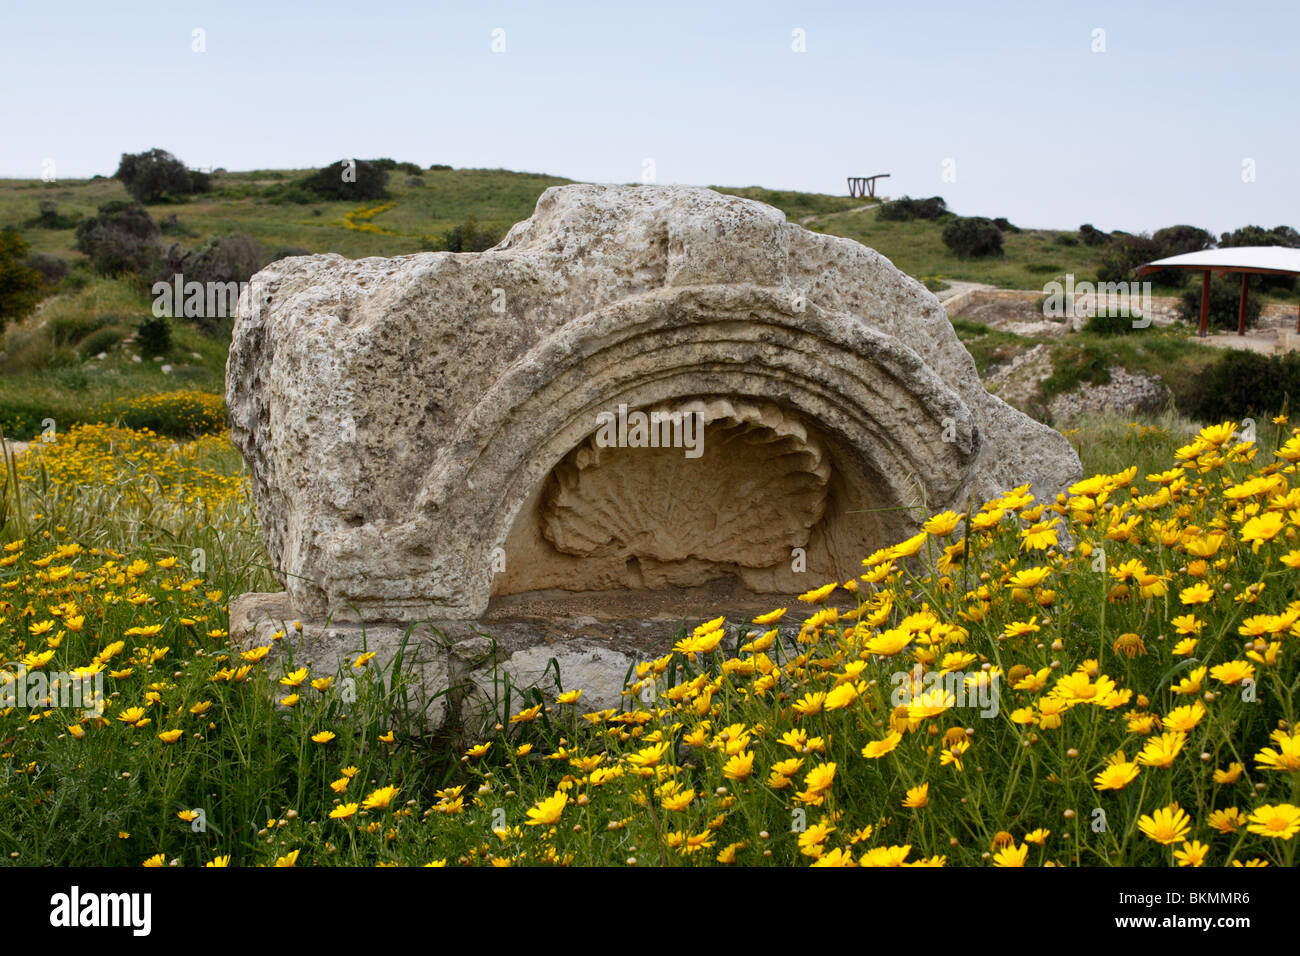 AN ANCIENT SINK WITHIN THE RUINS OF KOURION ON THE ISLAND OF CYPRUS. Stock Photo